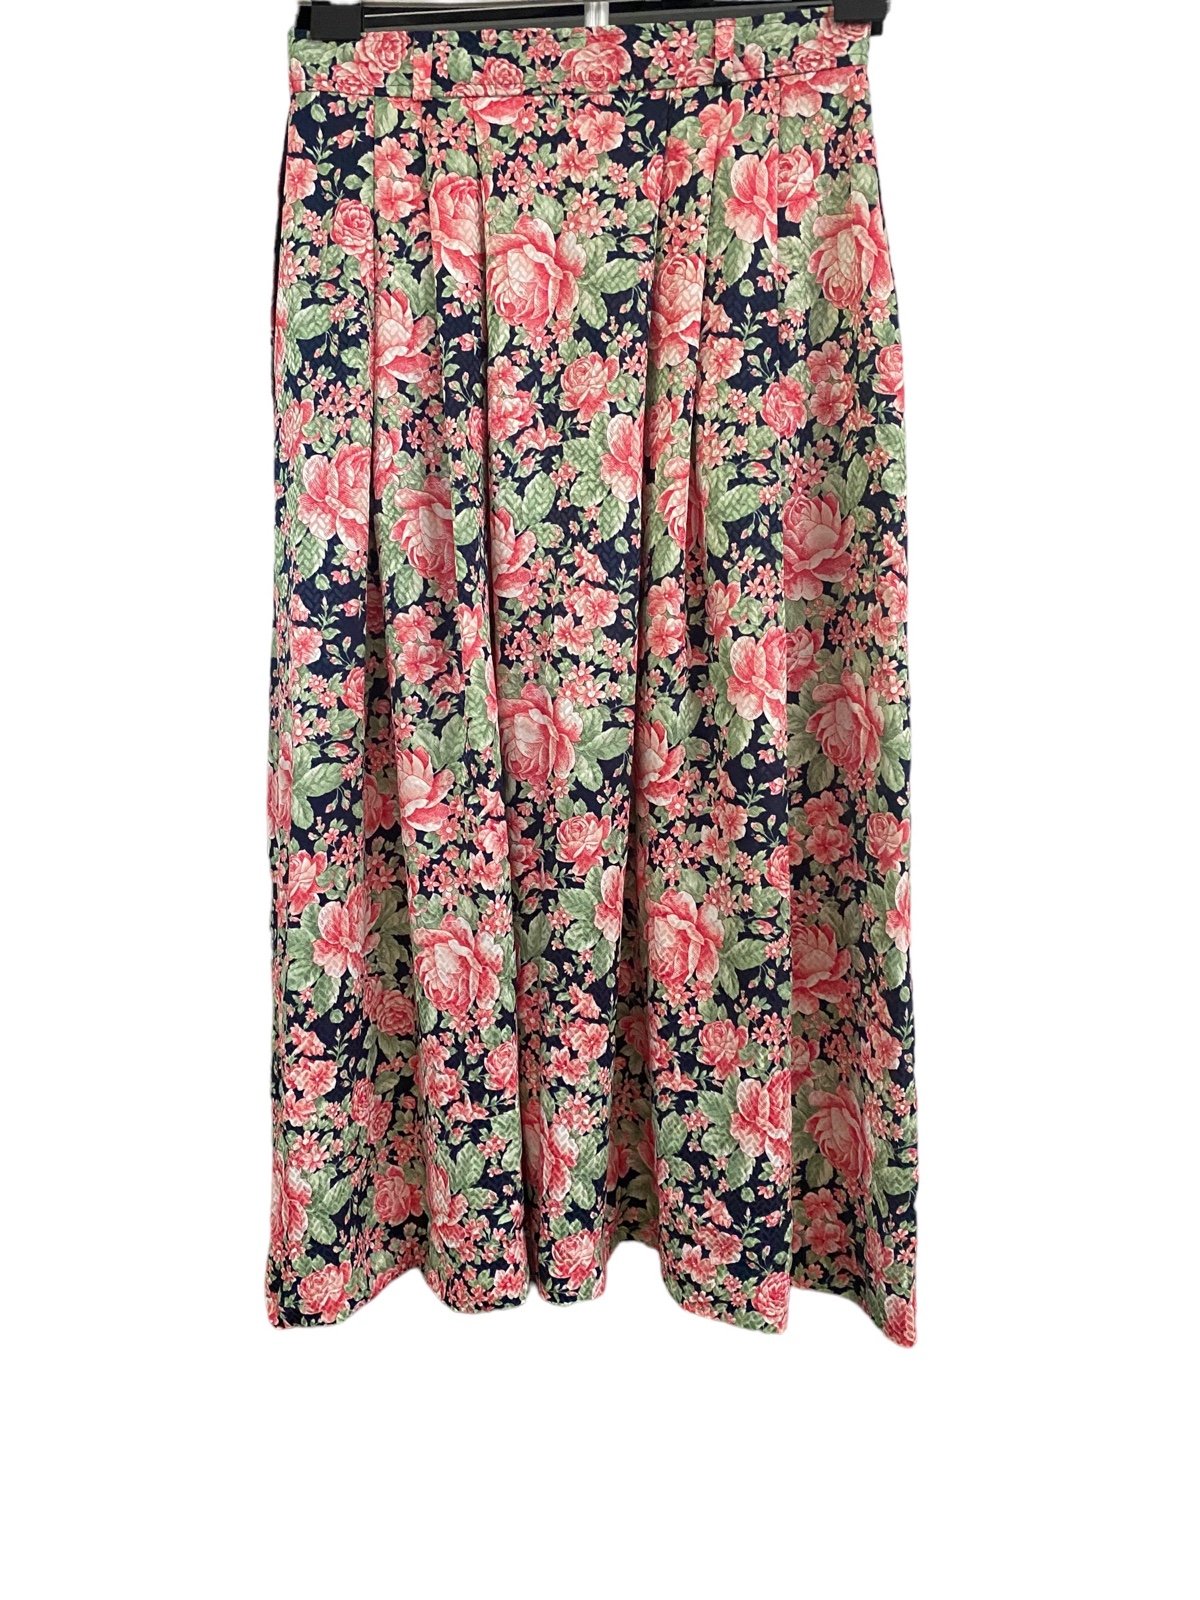 Beautiful Evan-Picone Multi Color Floral Pleated Skirt Size 12 p2mKnLJUU Buying Cheap